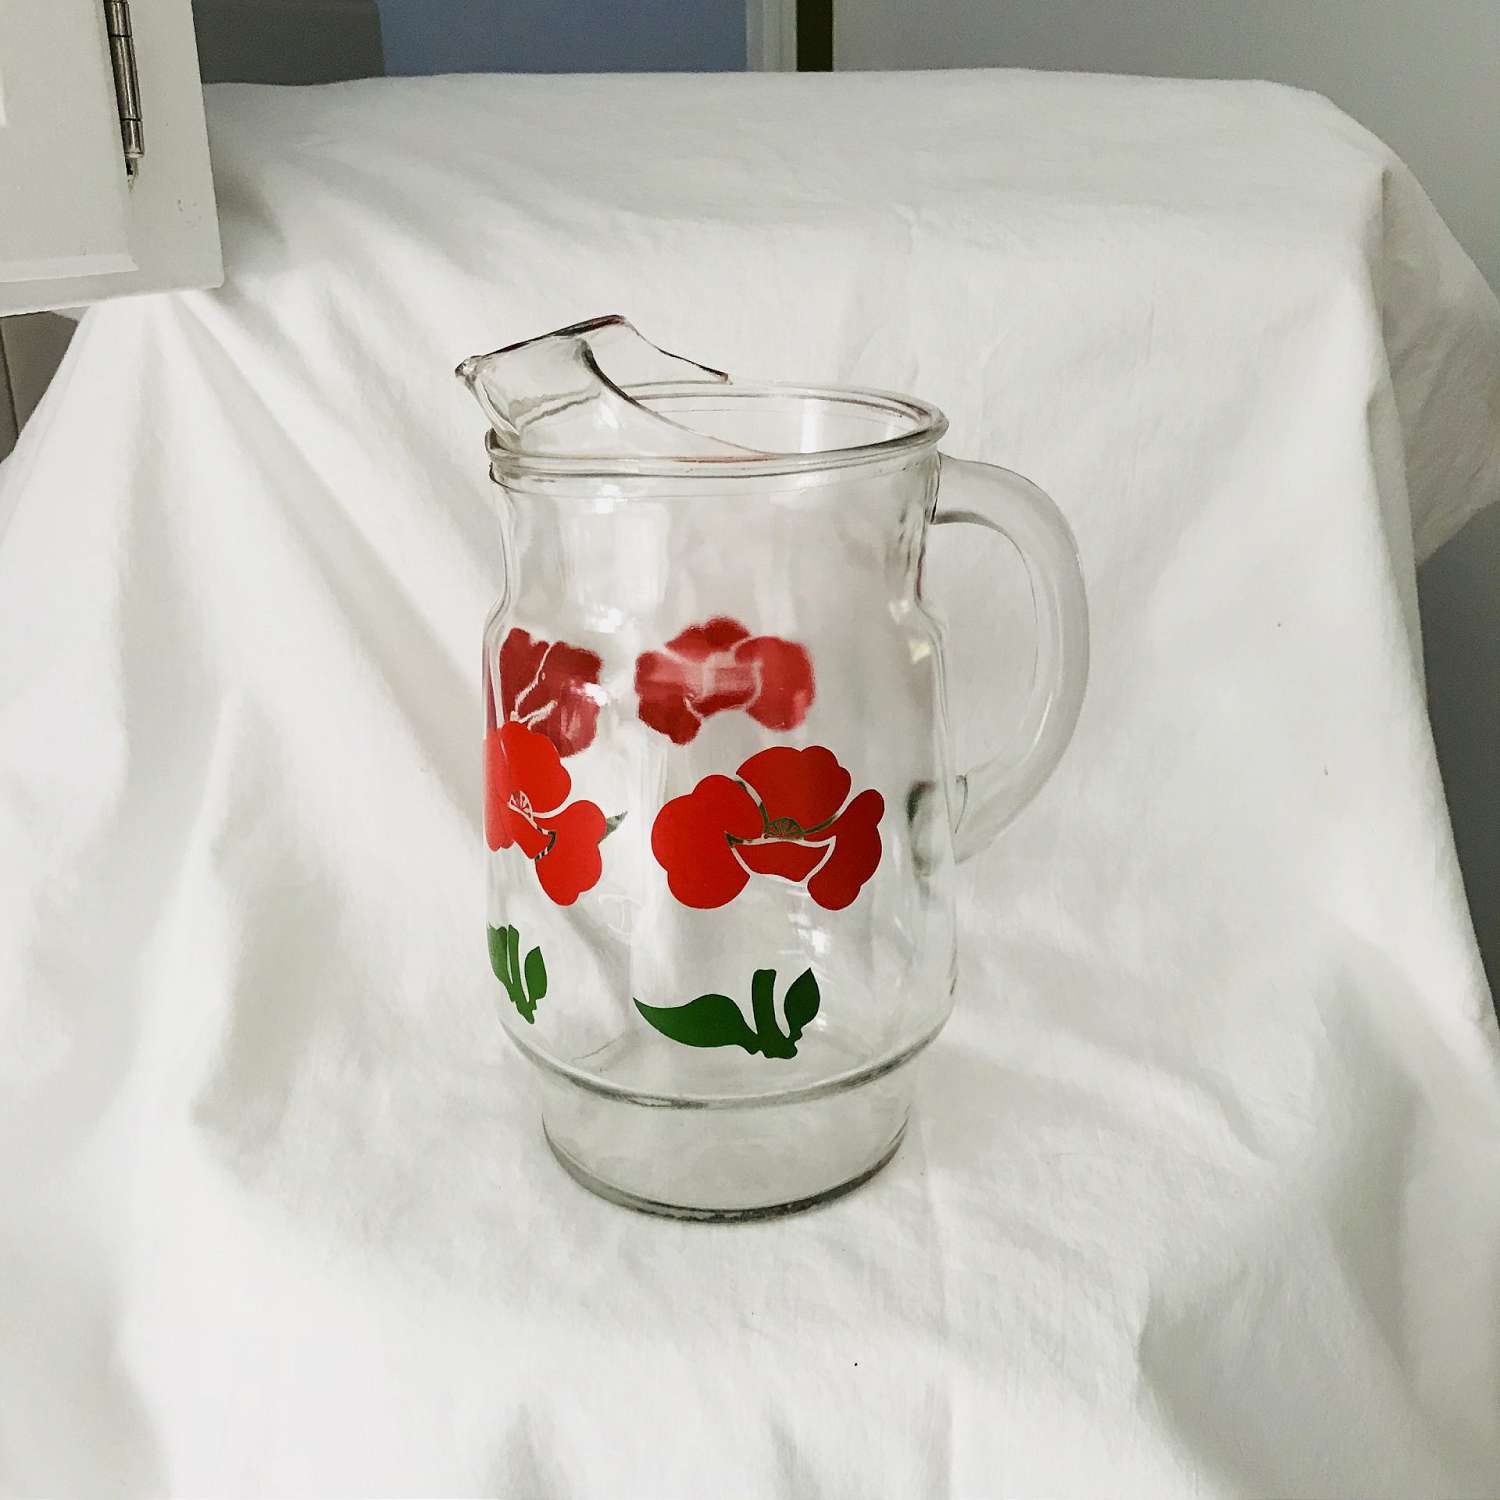 https://www.truevintageantiques.com/wp-content/uploads/2019/12/vintage-pitcher-glass-fired-on-paint-red-flowers-iced-tea-koolaid-collectible-retro-kitchen-display-farmhouse-summer-picnic-patio-water-5df953b67-scaled.jpg